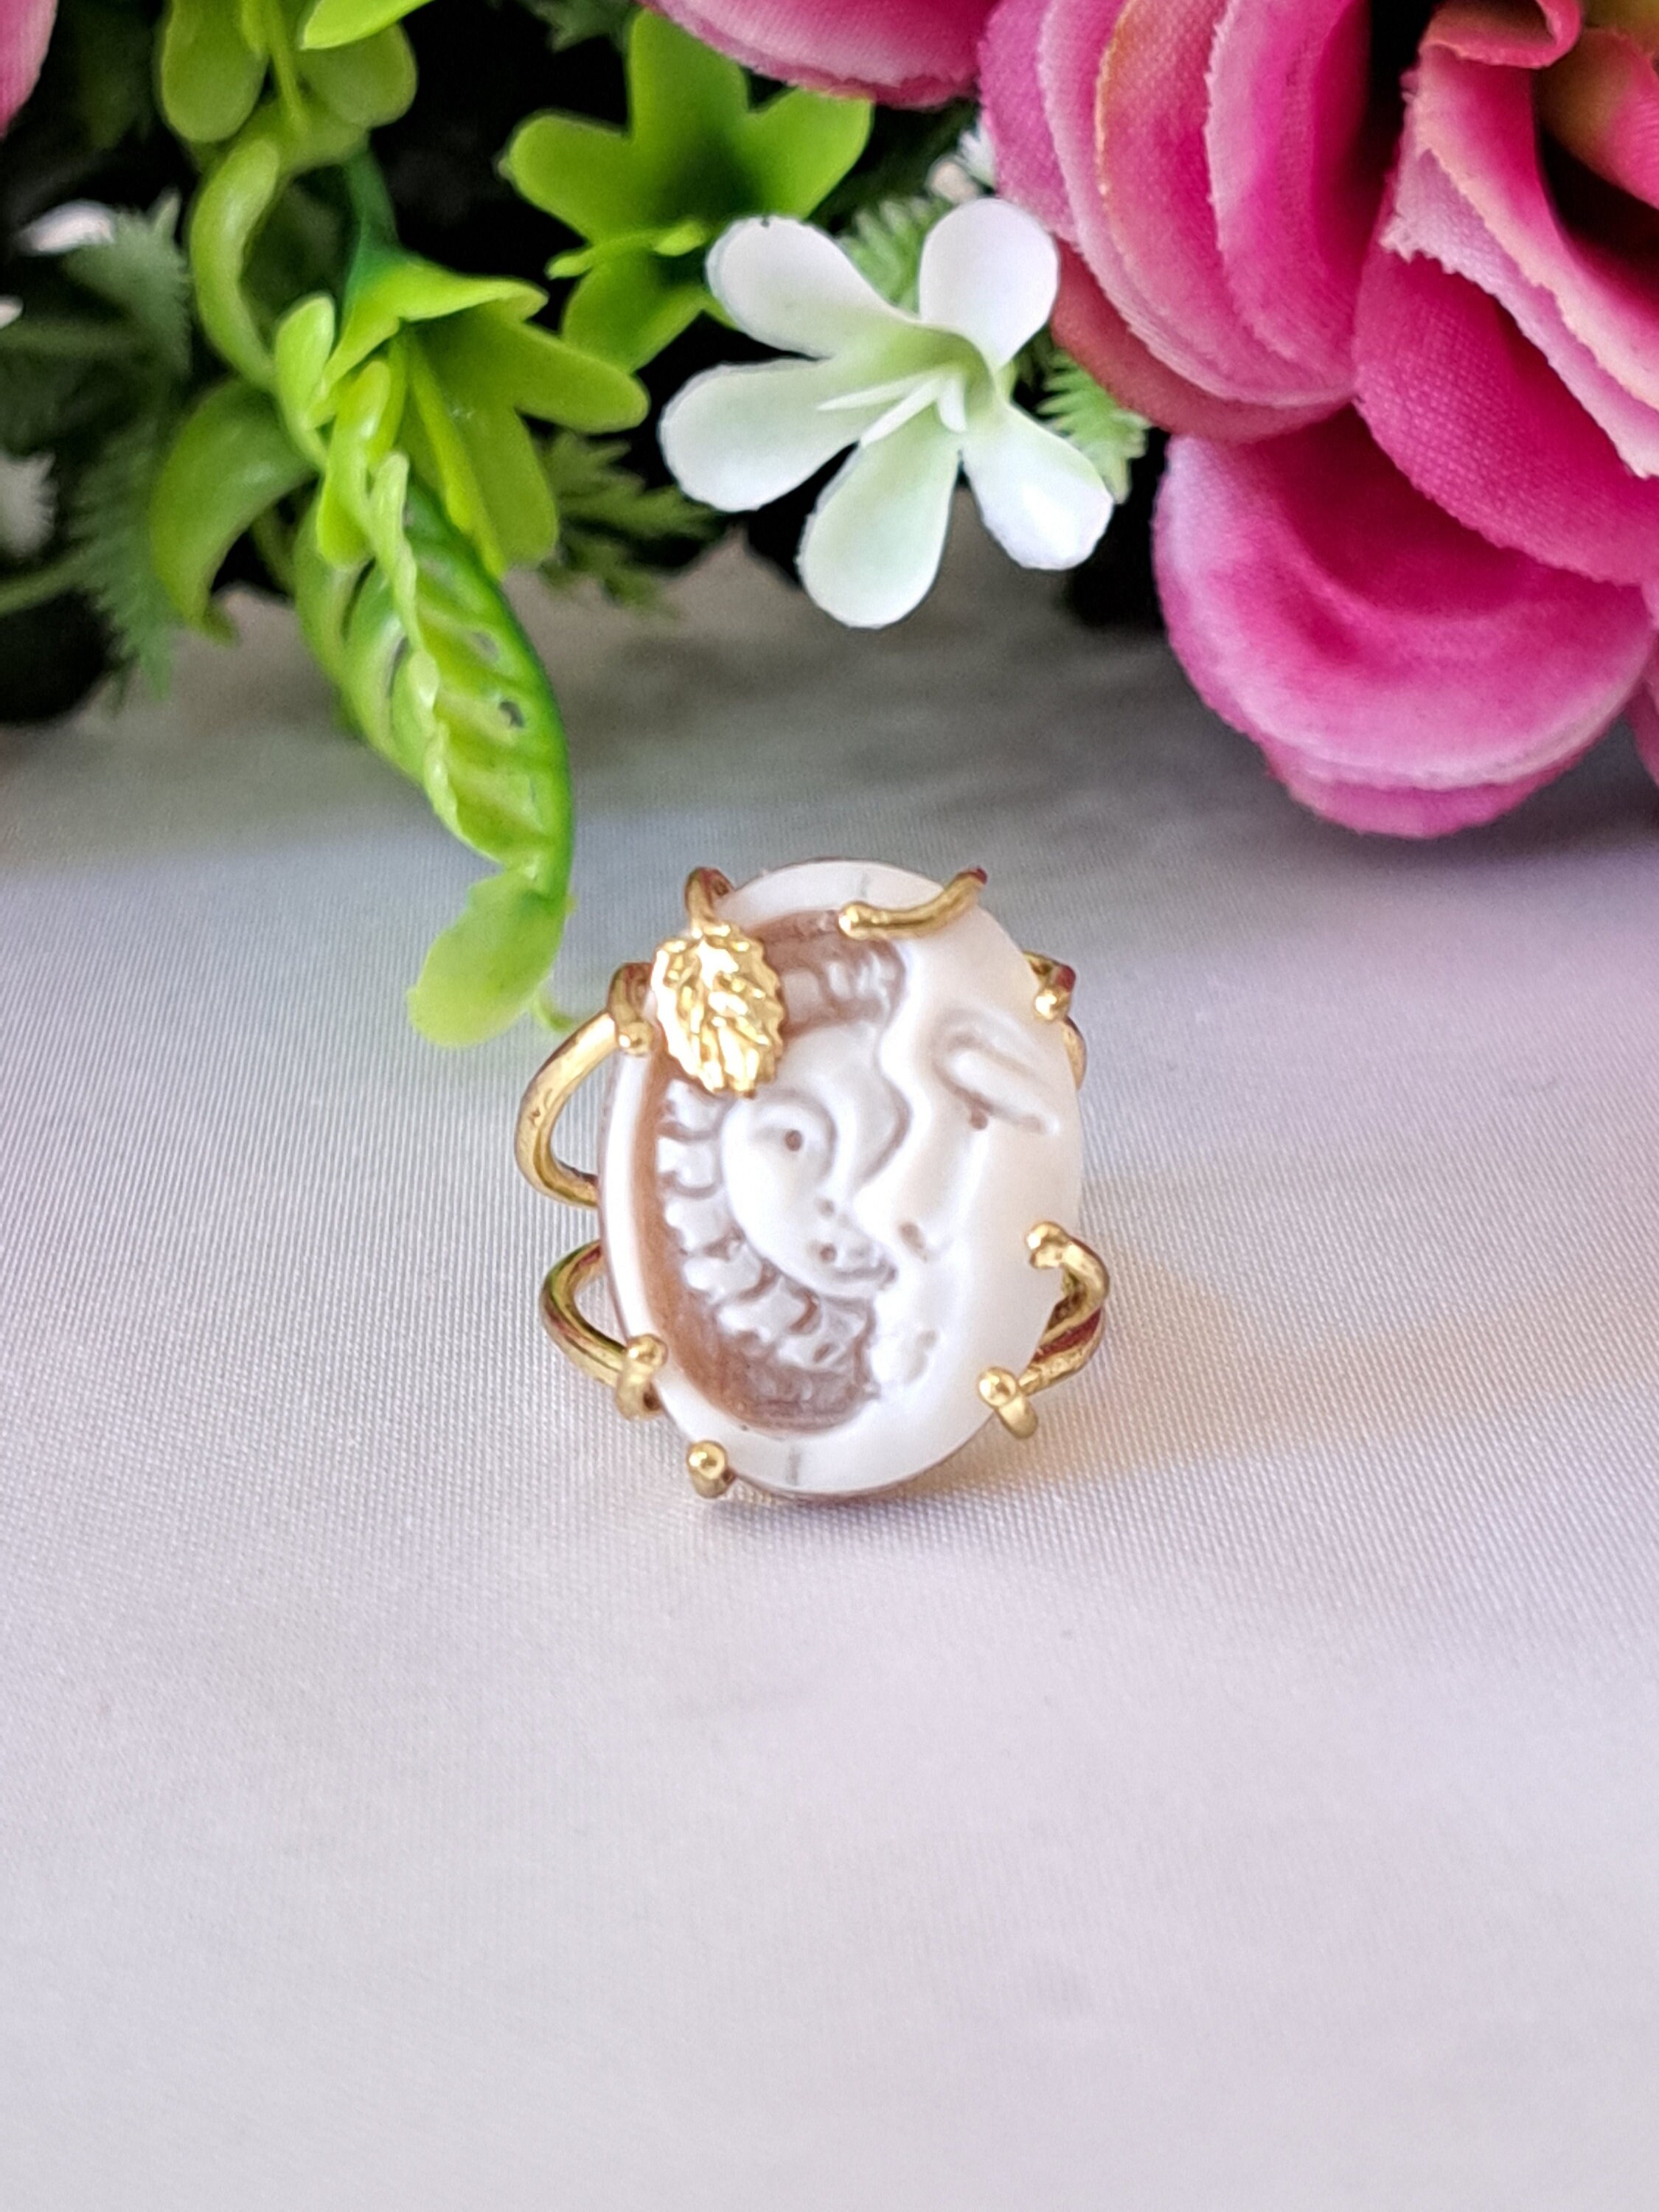 lydiasvintage Victorian Lady Cameo Brooch / Small Pin Steampunk Lover Gift Vintage Wedding Bridesmaid Favors Costume Brooch Bouquet Boutineer on A Budget